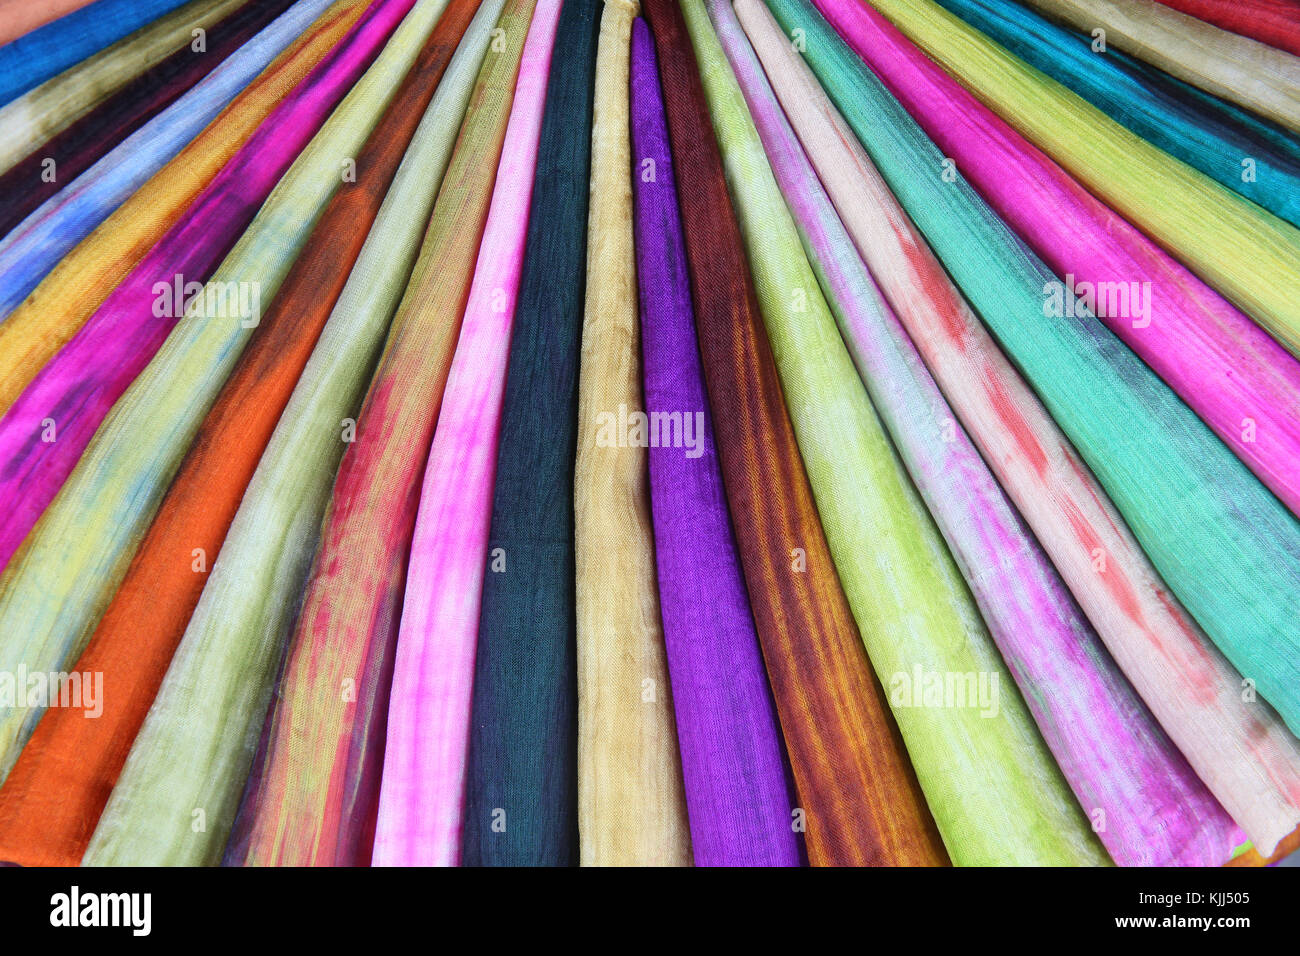 Vietnamese colorful scarf in a row scarves vivid colors stripes.  Hoi An. Vietnam. Stock Photo